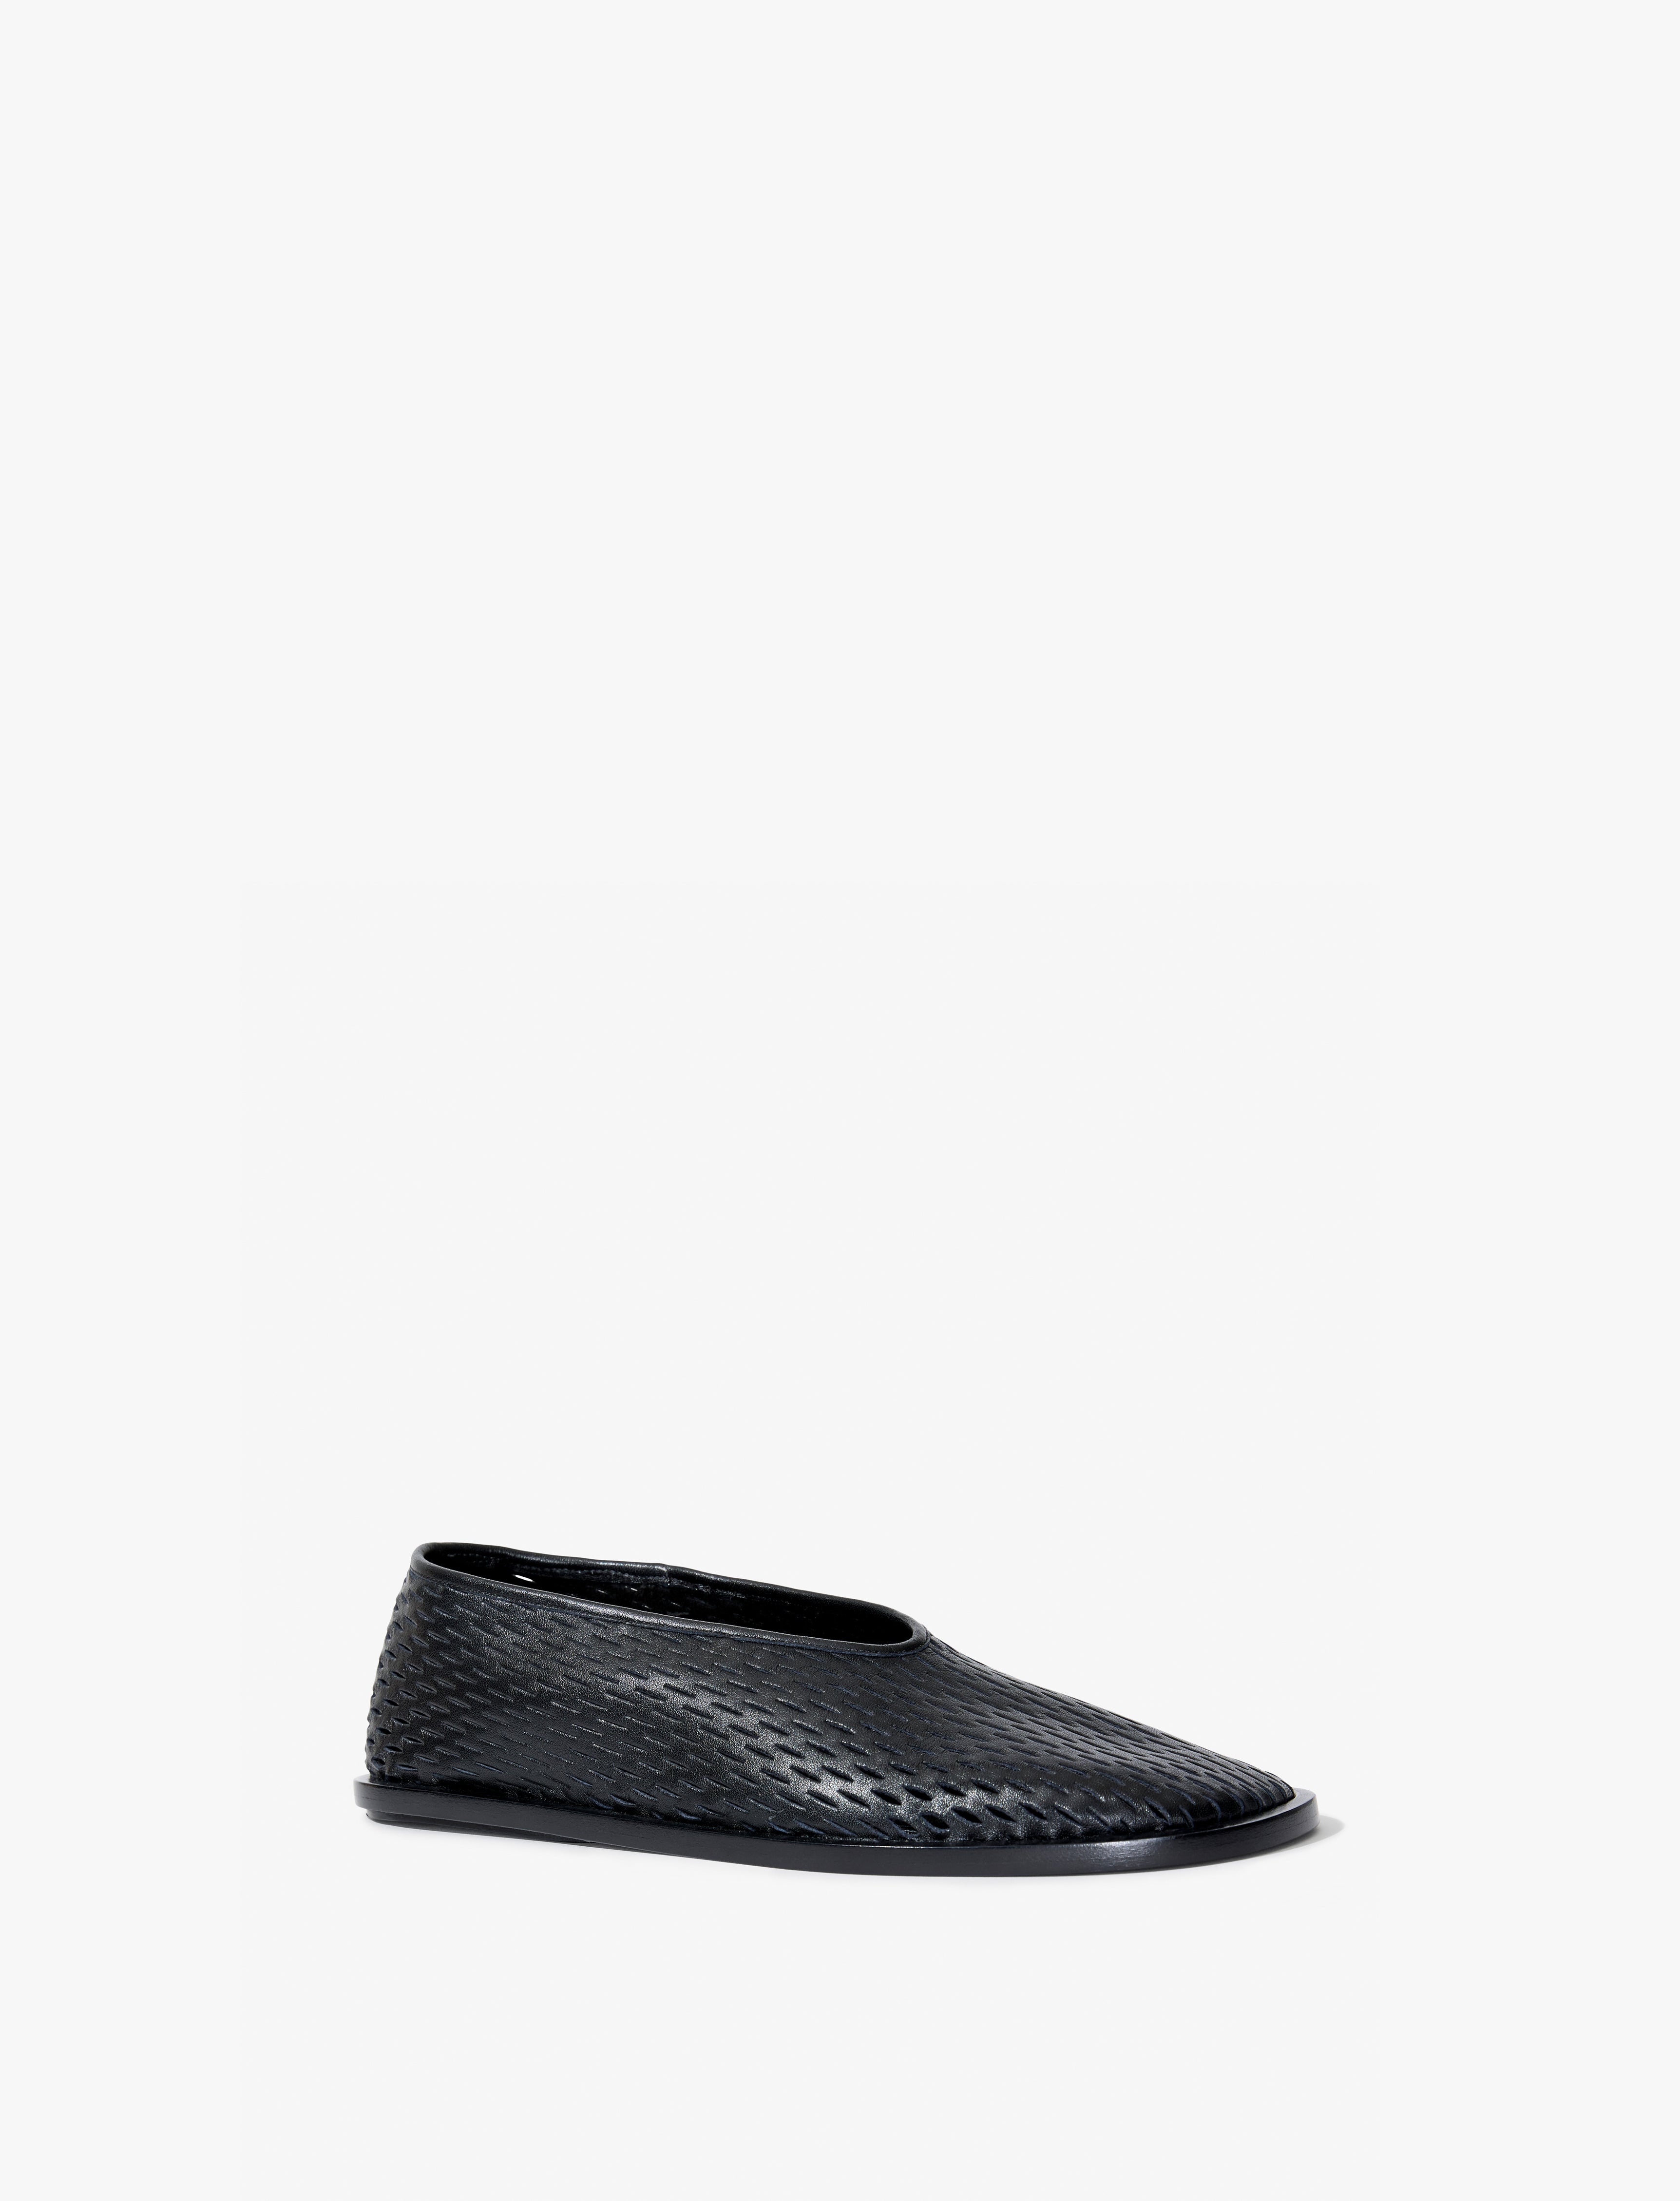 Square Perforated Slippers - 2